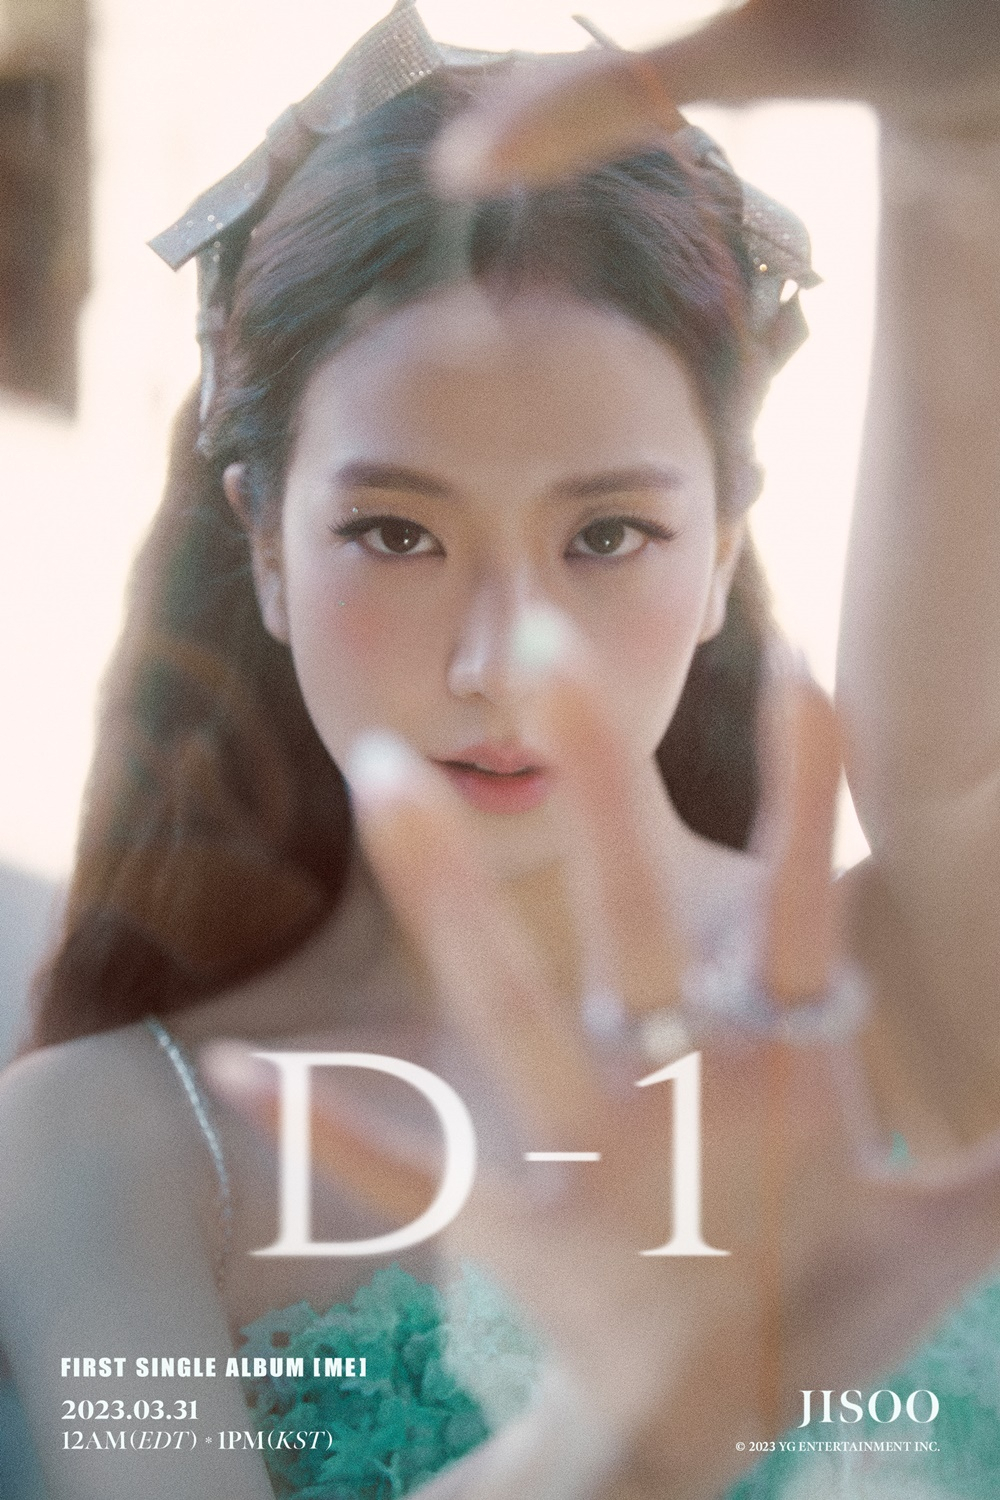 Teaser poster for Jisoo's 1st solo album